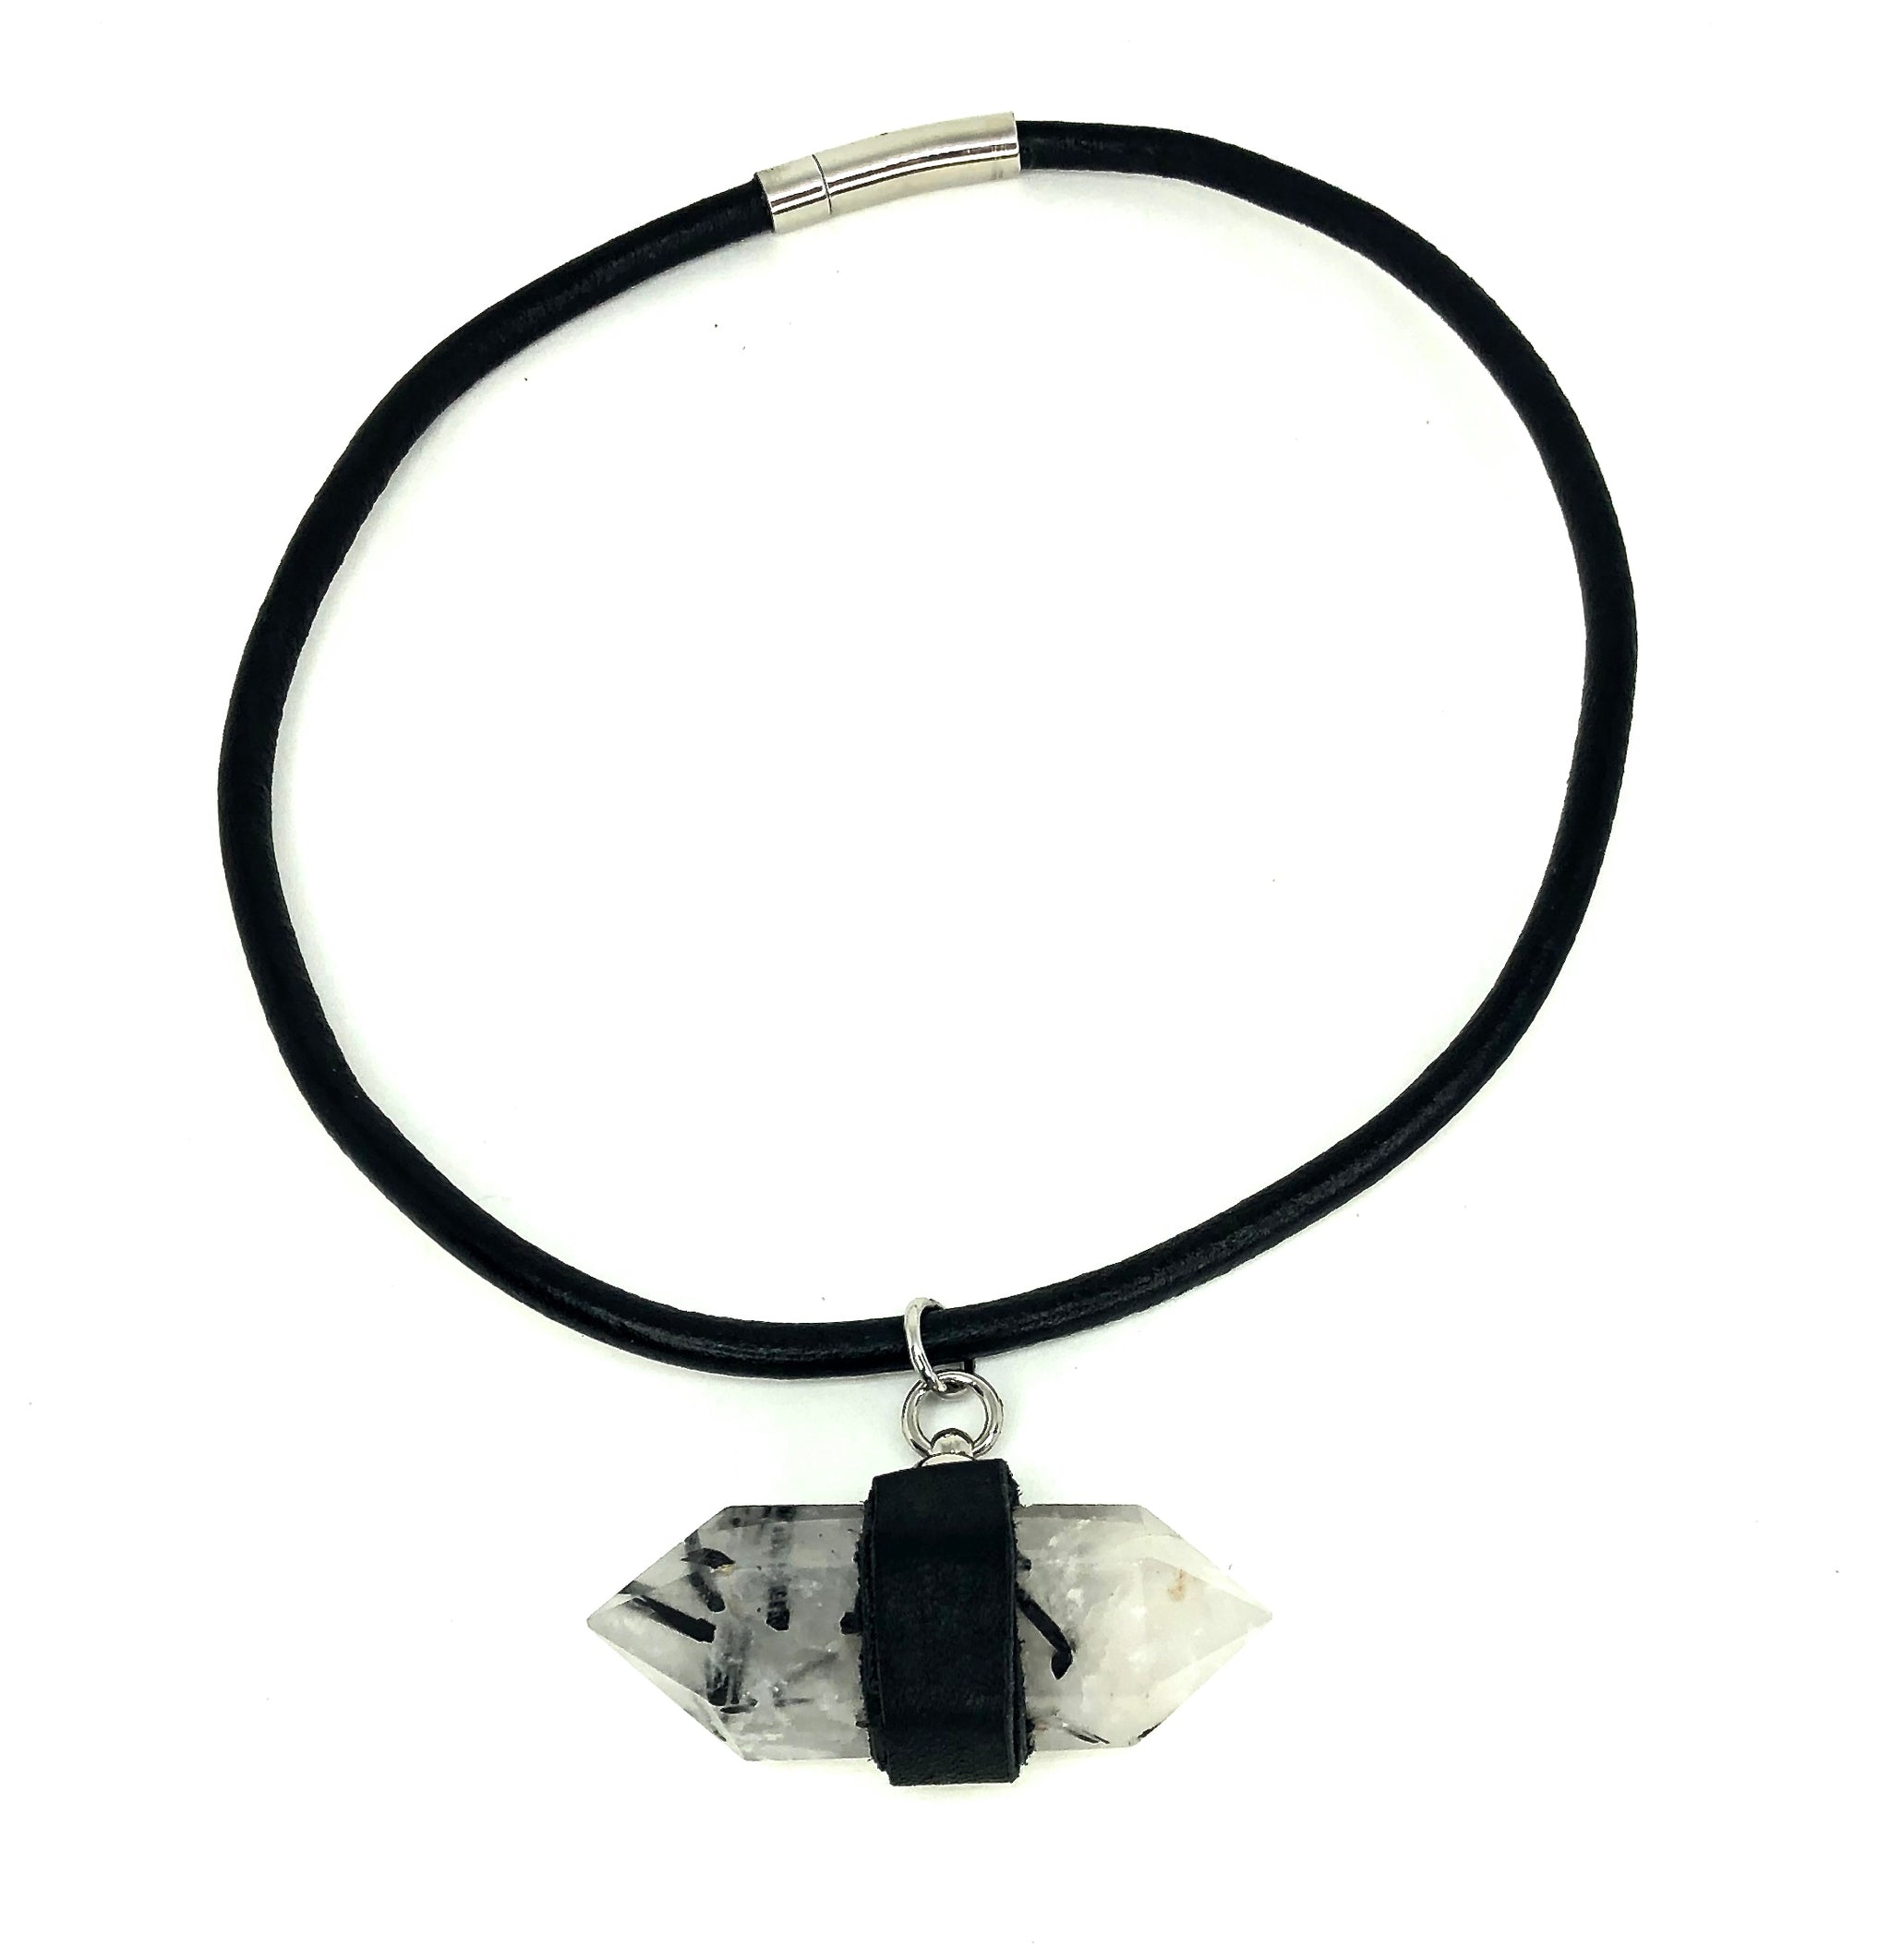 Ketti Jewelry — Spiny Urchins Necklace Black Agate (small beads)